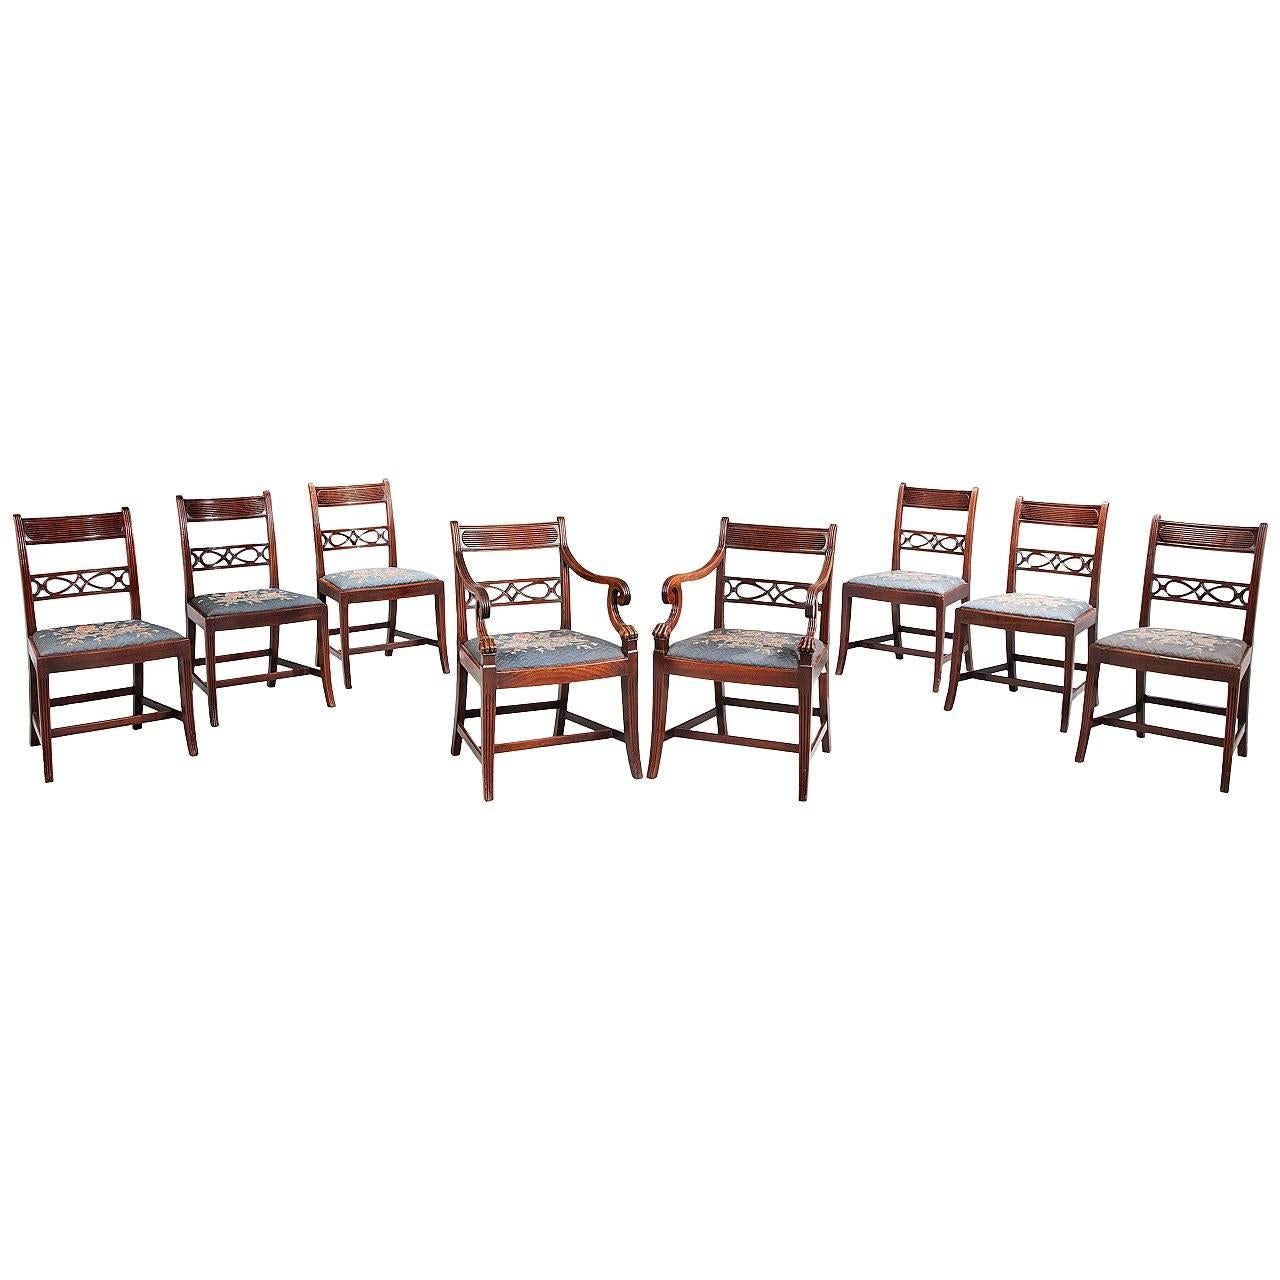  Eight George III period Dining Chairs with Pierced Splats